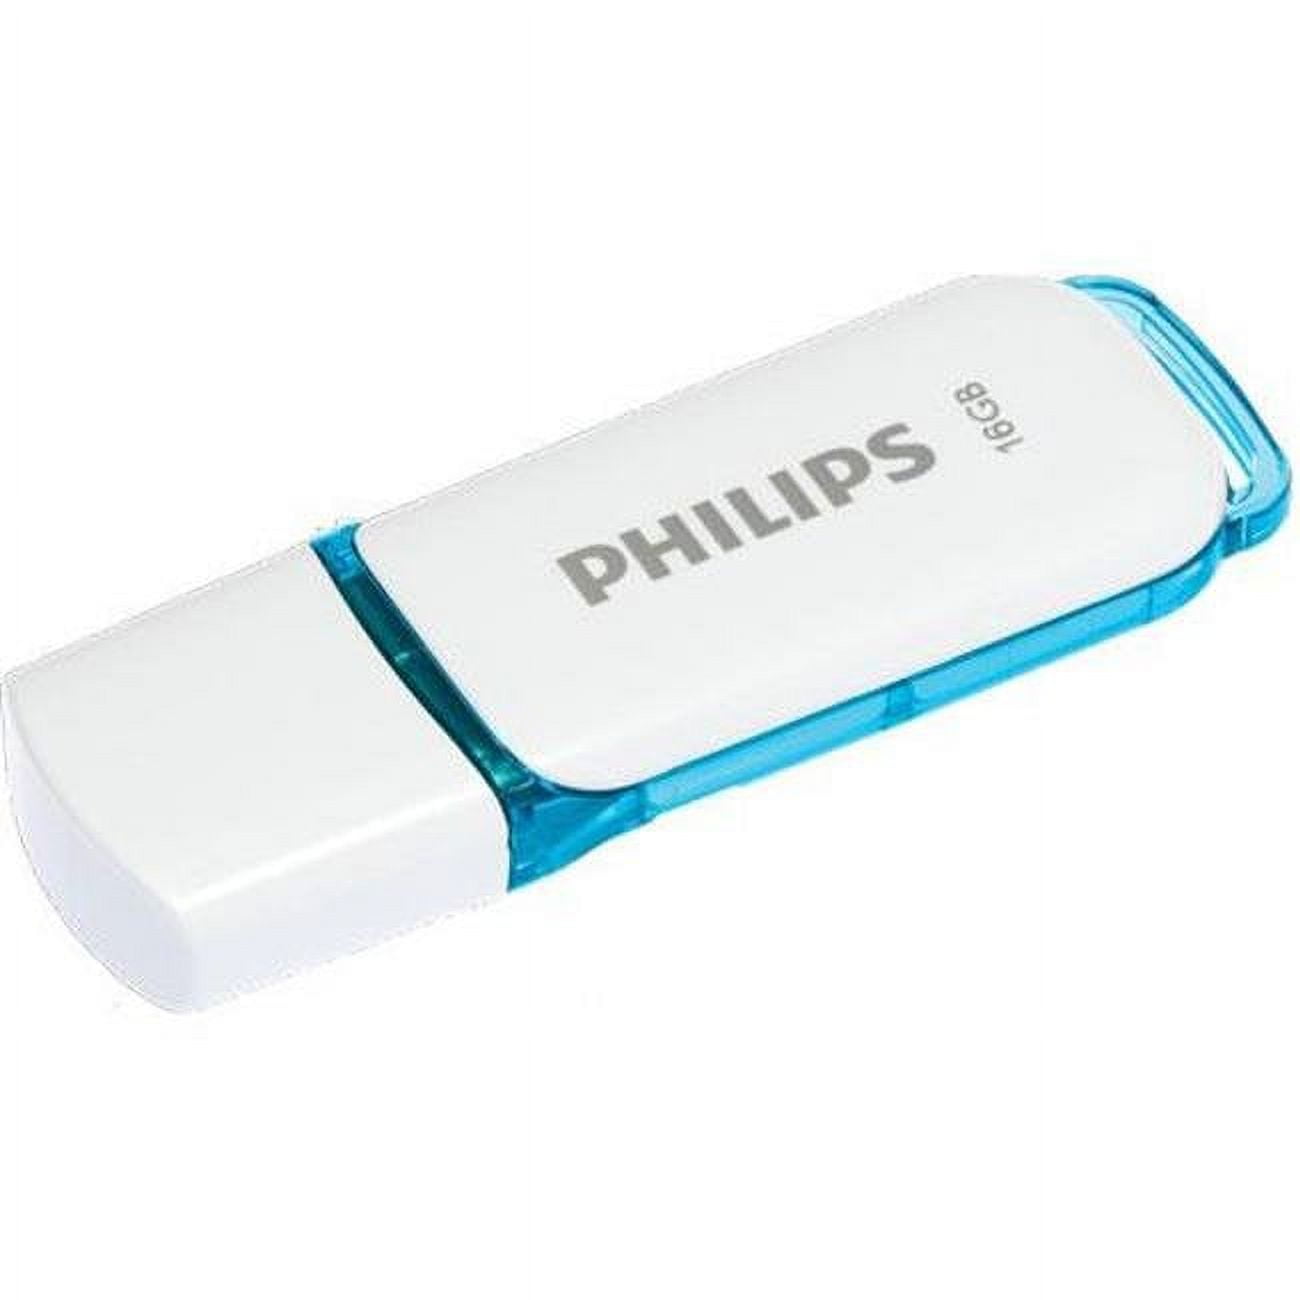 Picture of Philips PHMMD16GSNOWU2 USB2.0 16GB Snow Edition Flash Drive - Blue